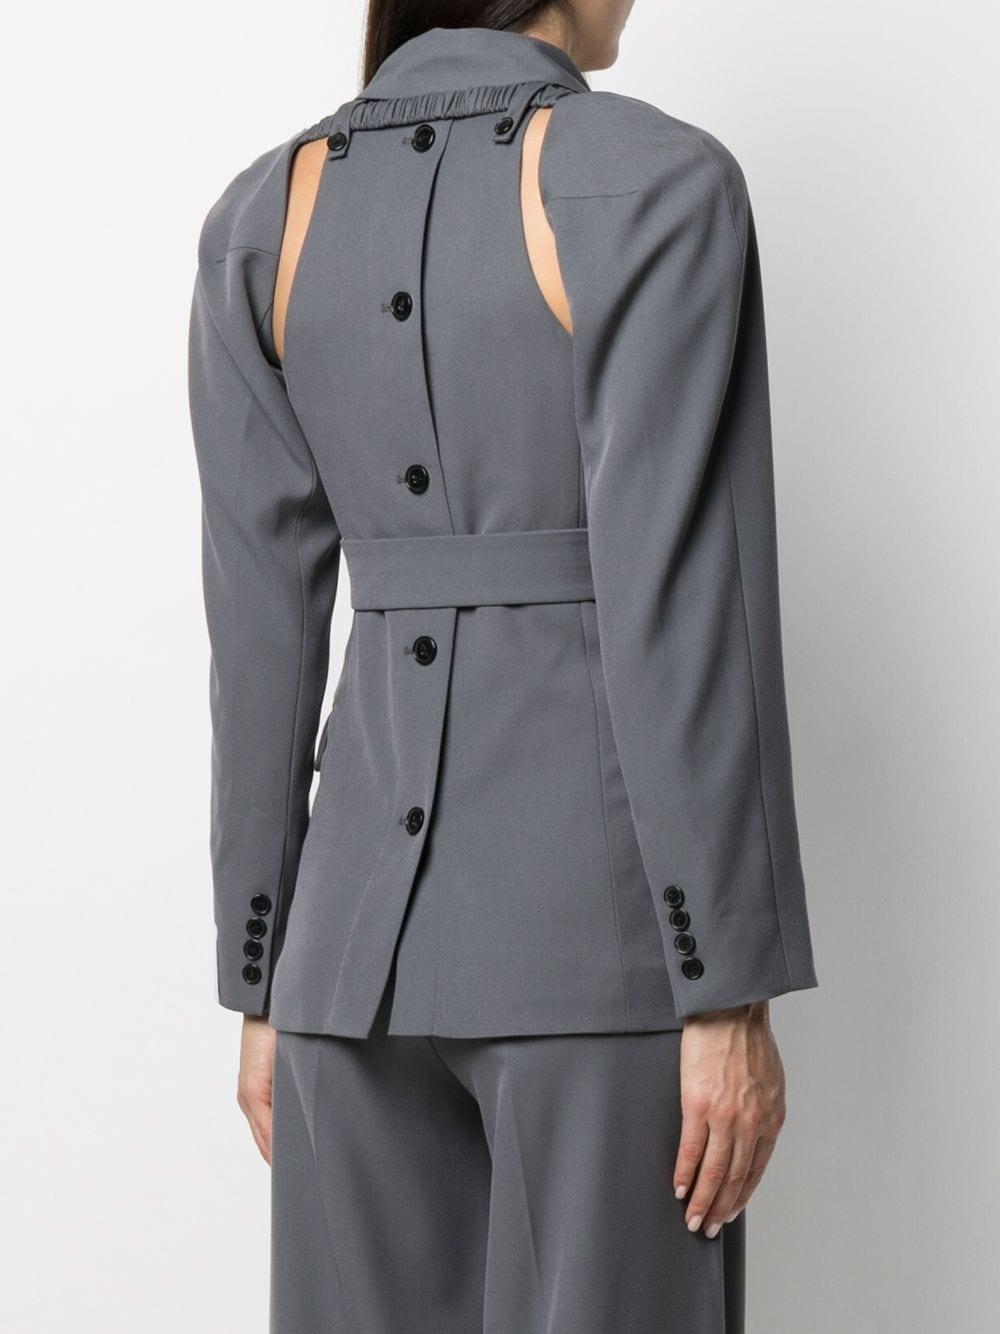 ROKH Removable Sleeves Blazer in Gray | Lyst